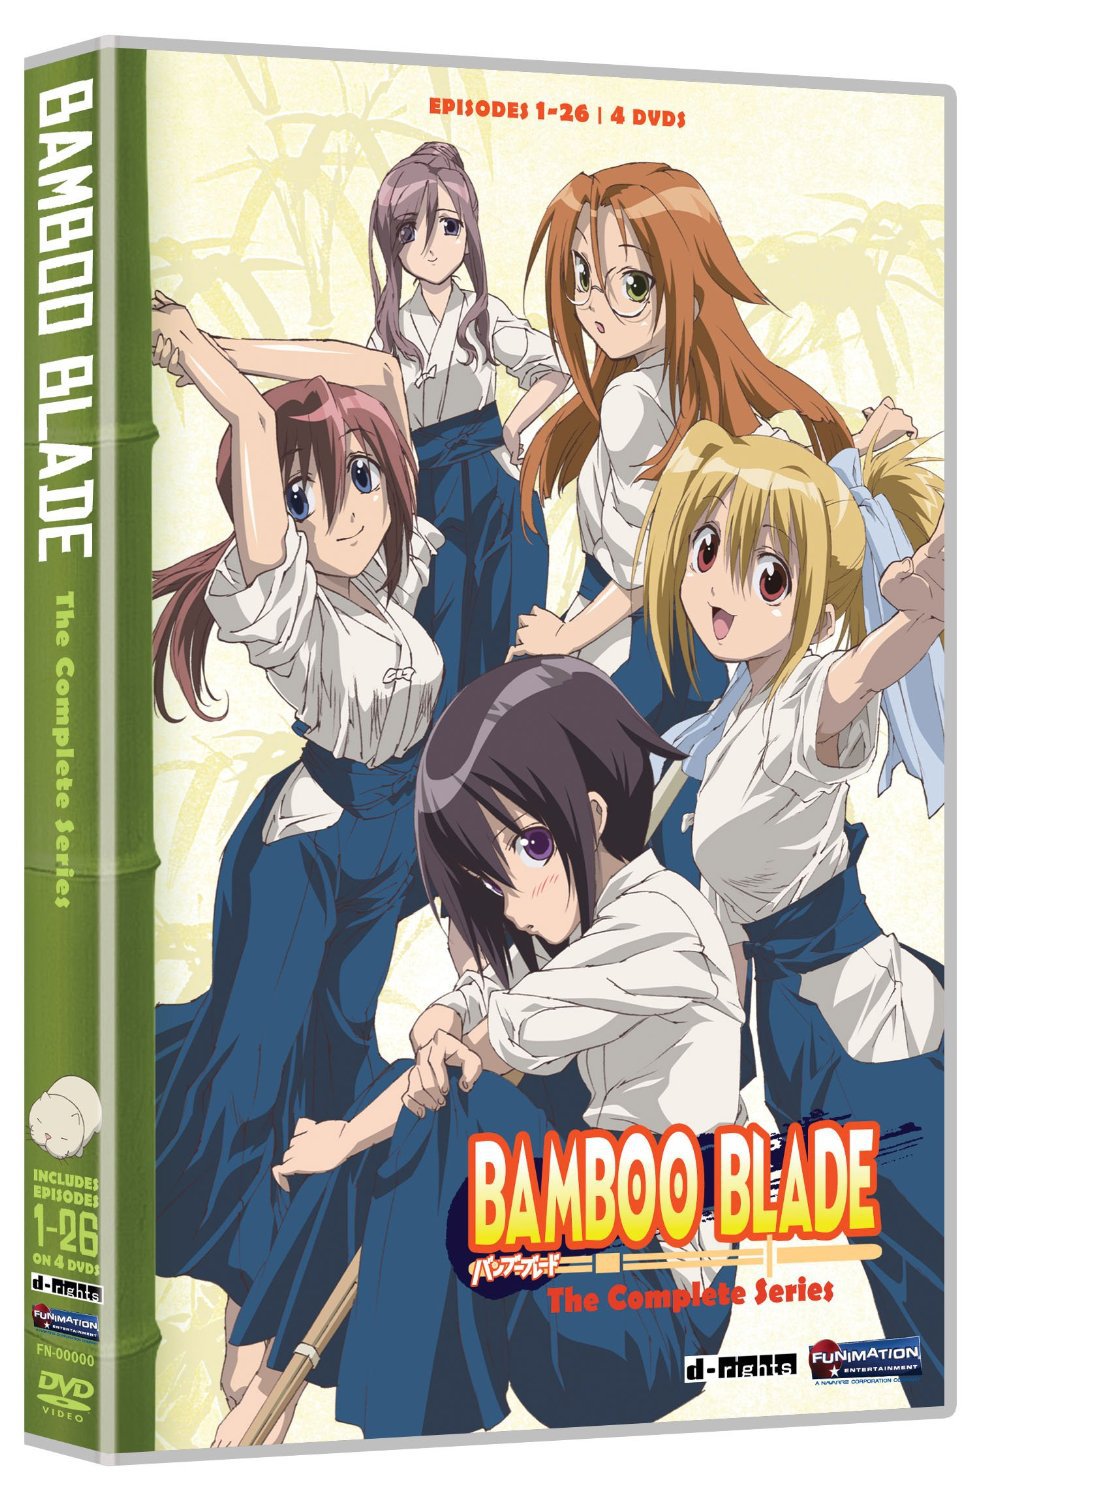 Bamboo Blade: Complete Series